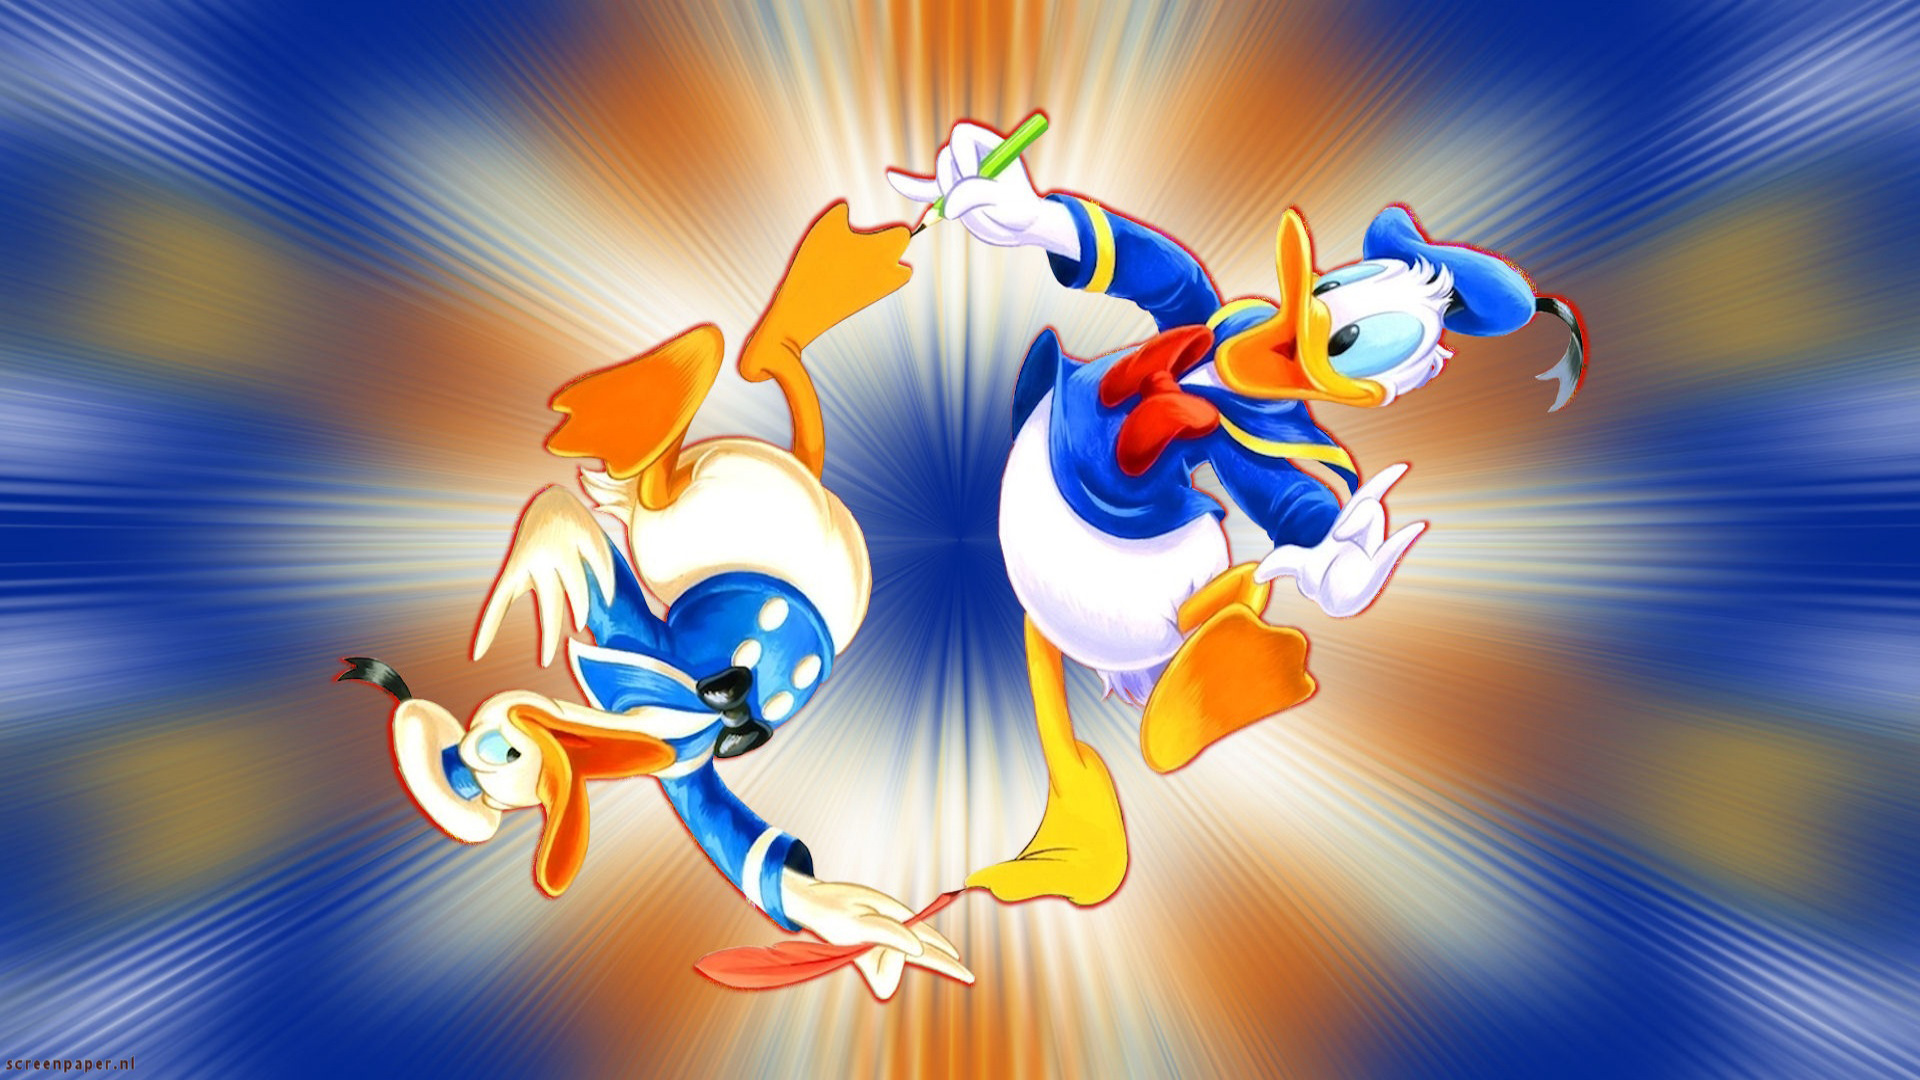 Donald Duck Picture Hd Wallpaper High Resolution For ...